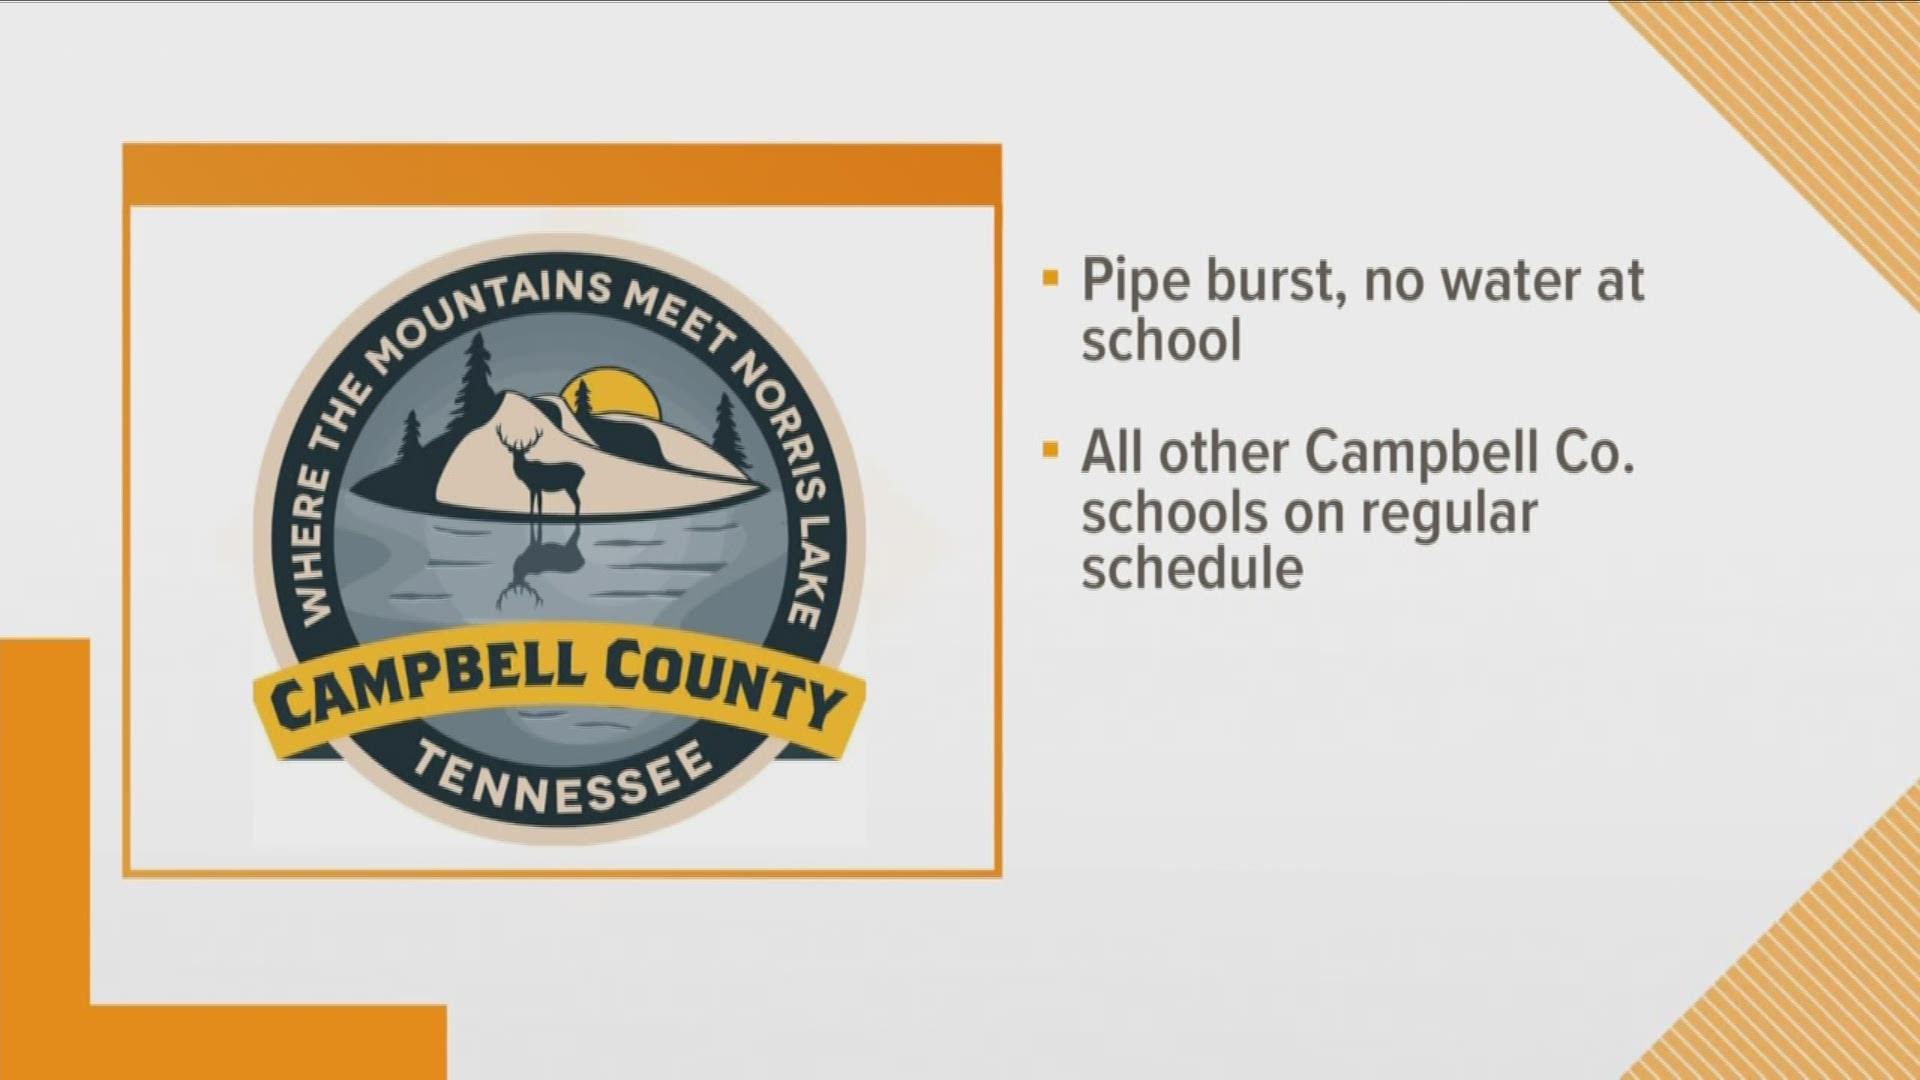 Campbell County Schools announced the closure at around 7 p.m. on Nov. 25.